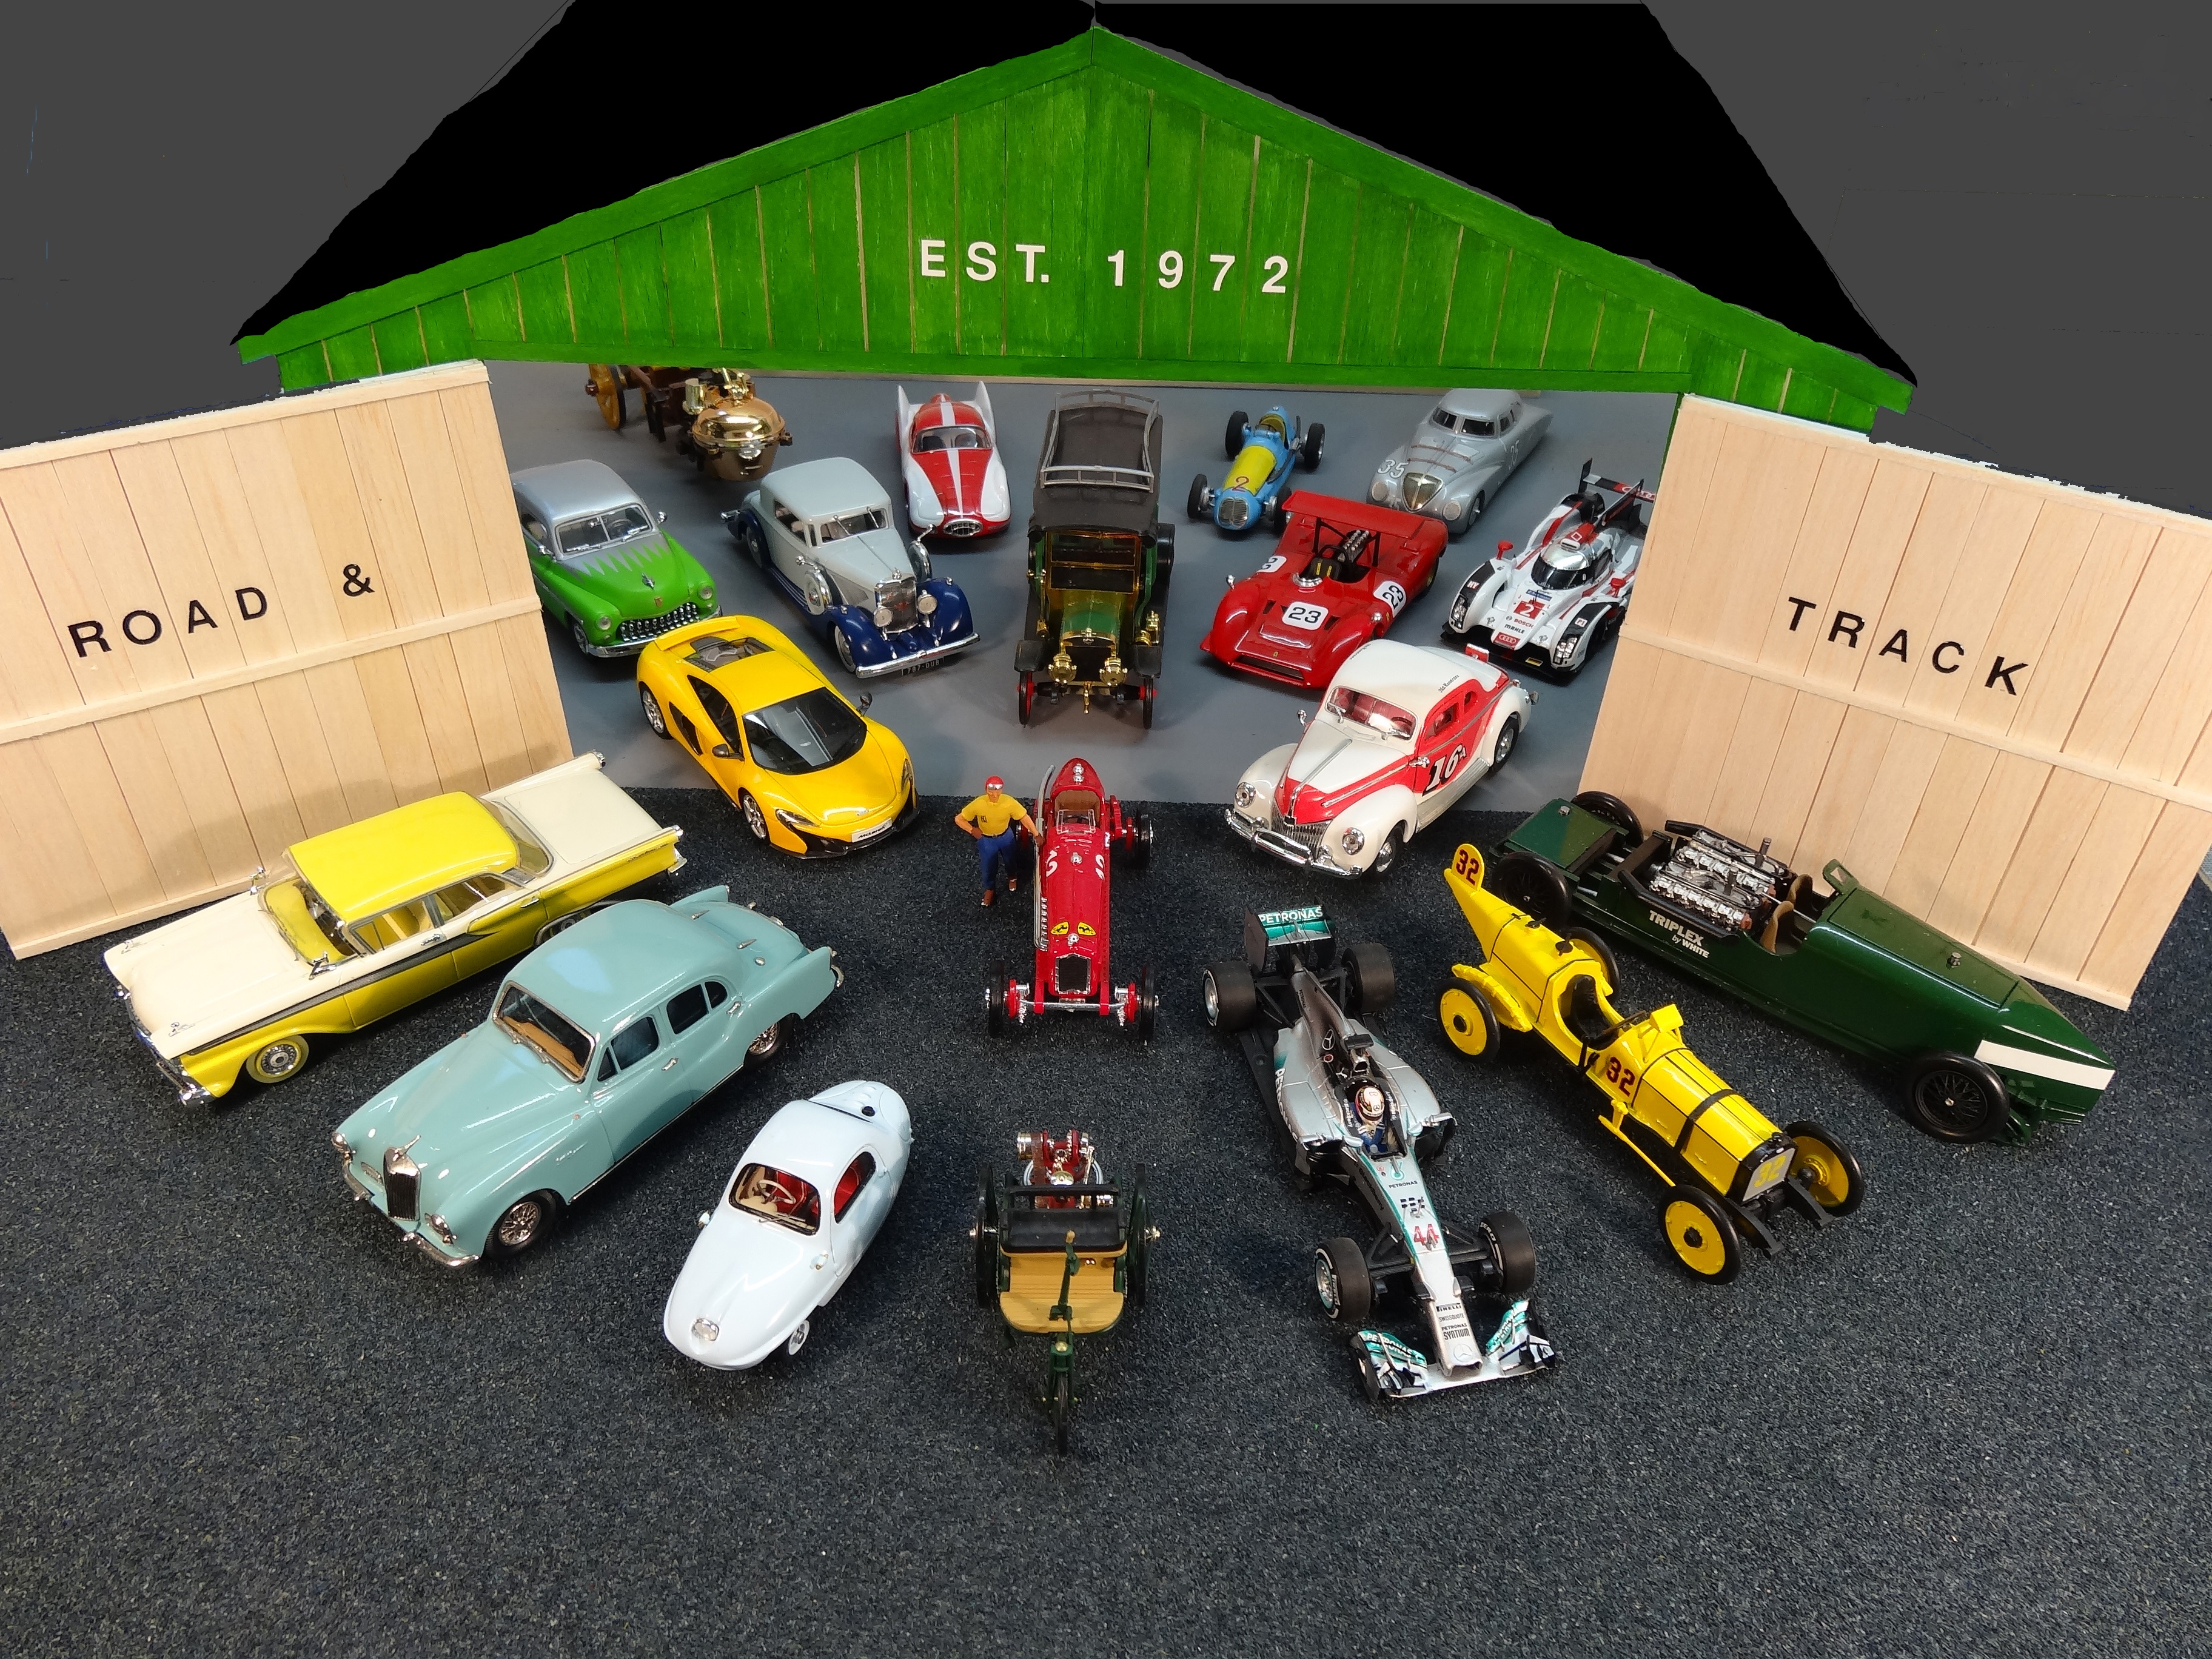 TOGMAC - Collection of Model Cars - Part 1